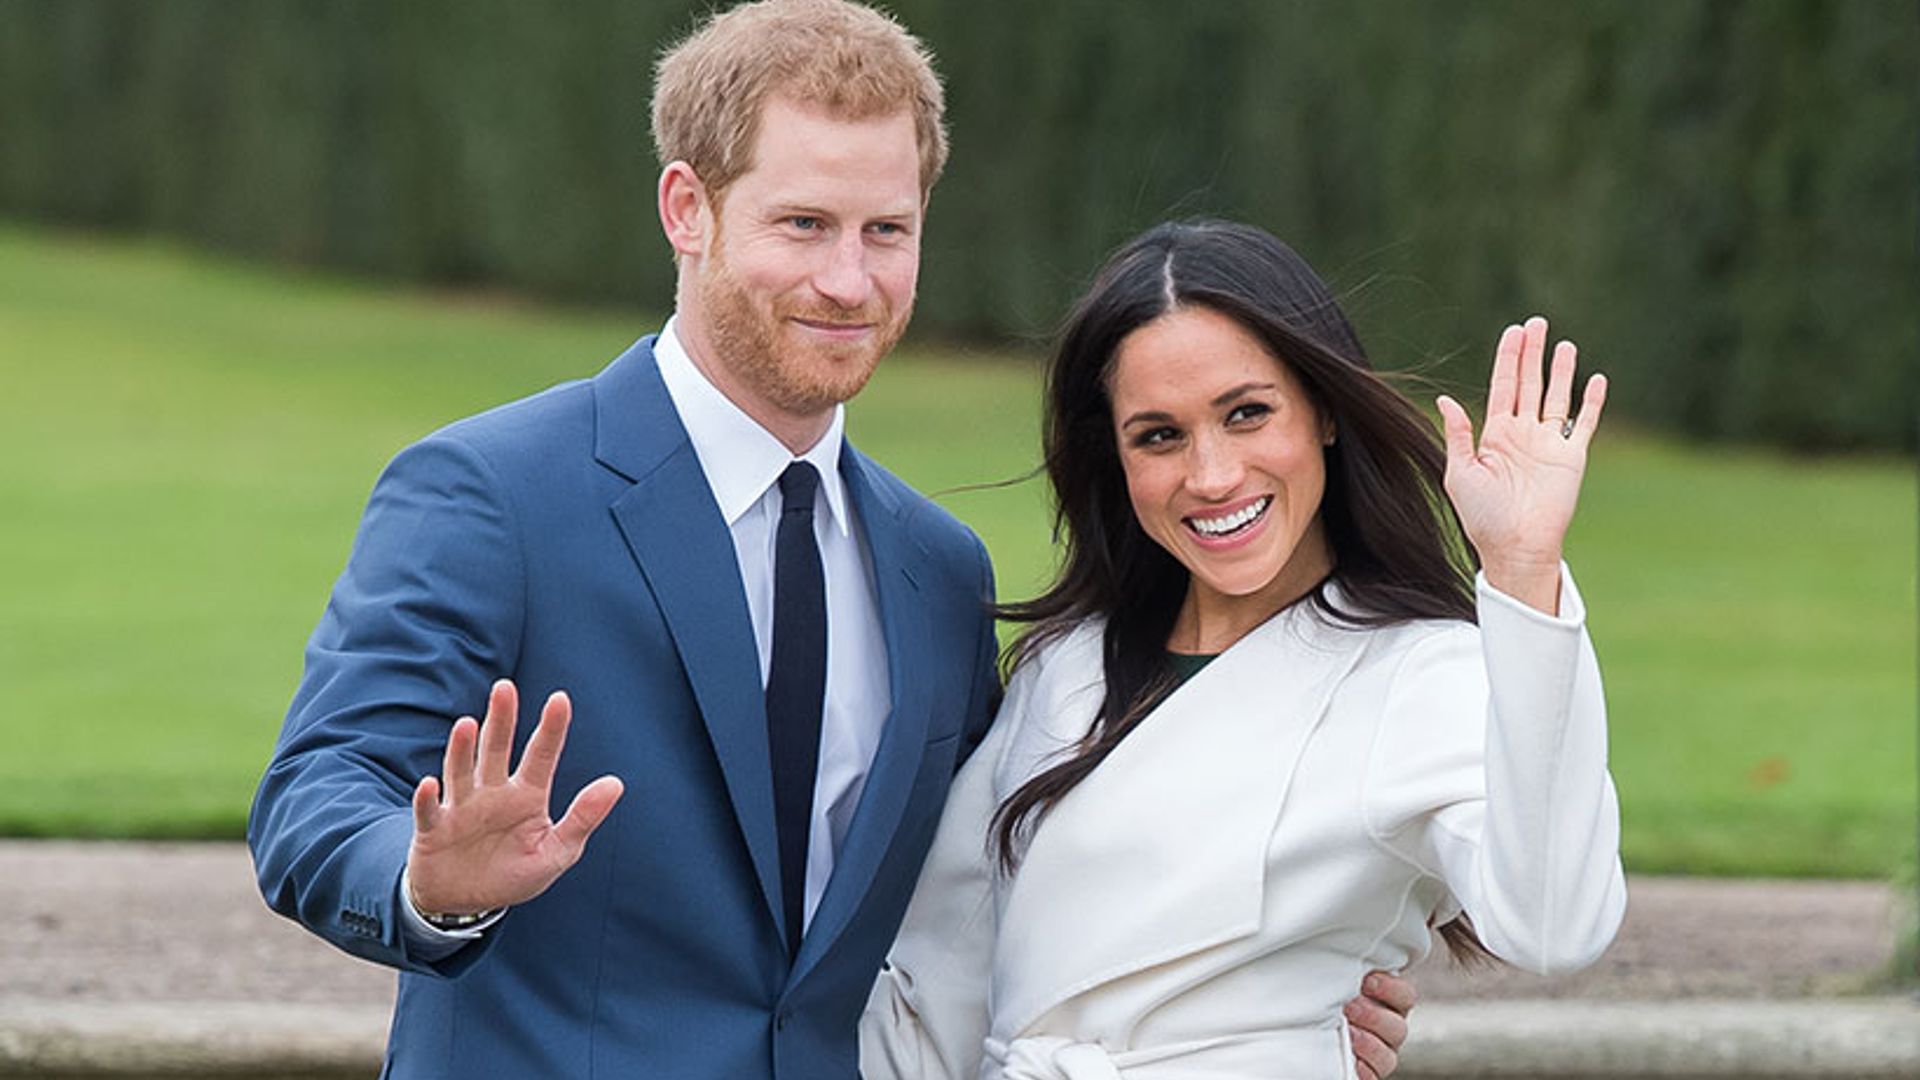 Prince Harry and Meghan Markle's first official royal outing to take place on Friday